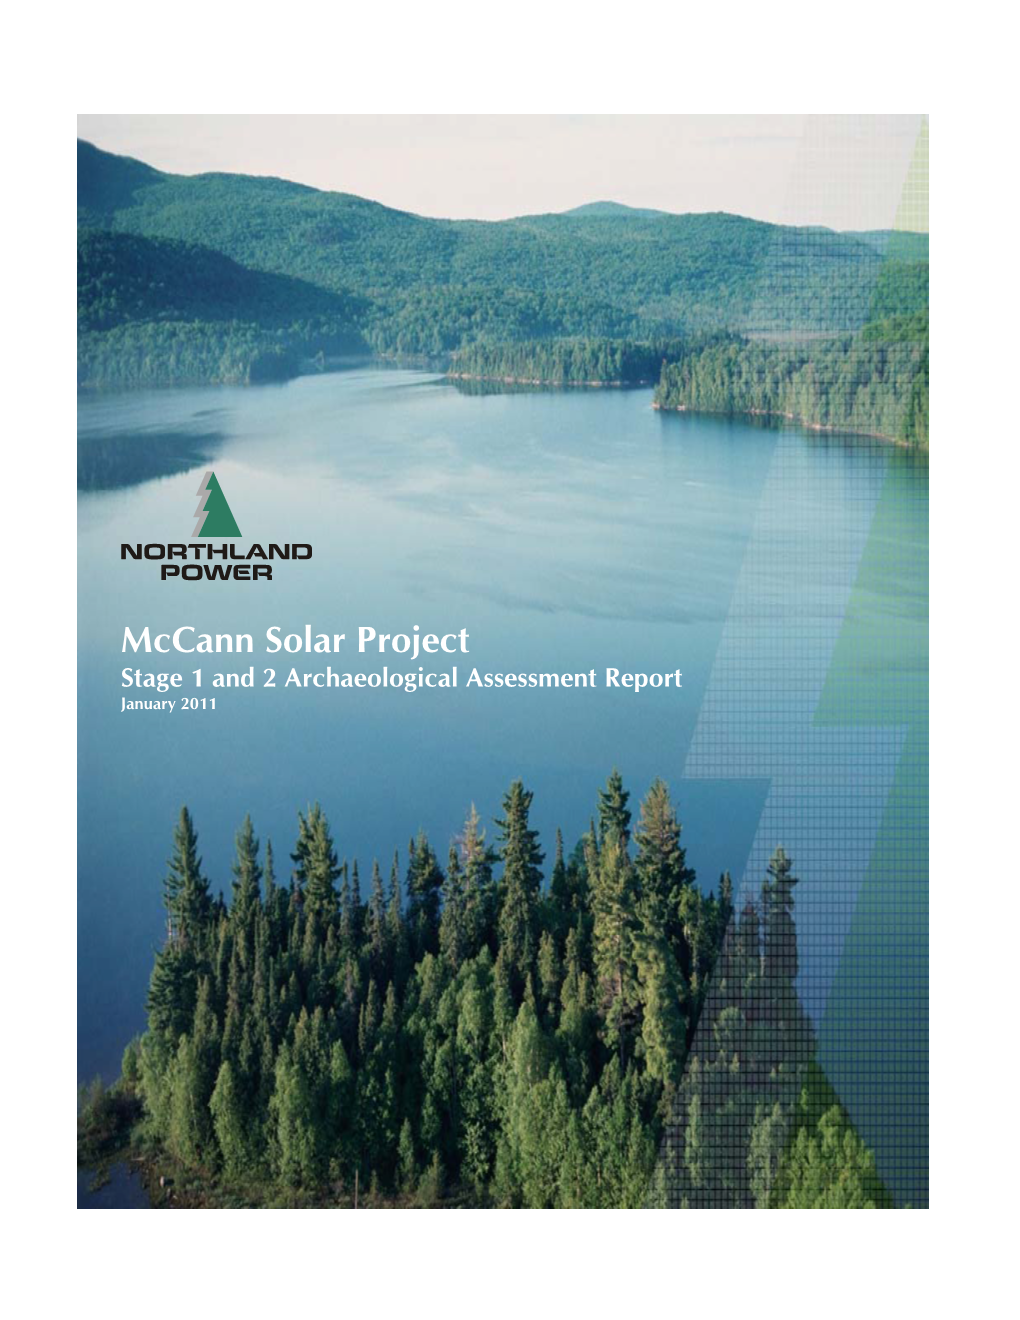 Mccann Solar Project Stage 1 and 2 Archaeological Assessment Report January 2011